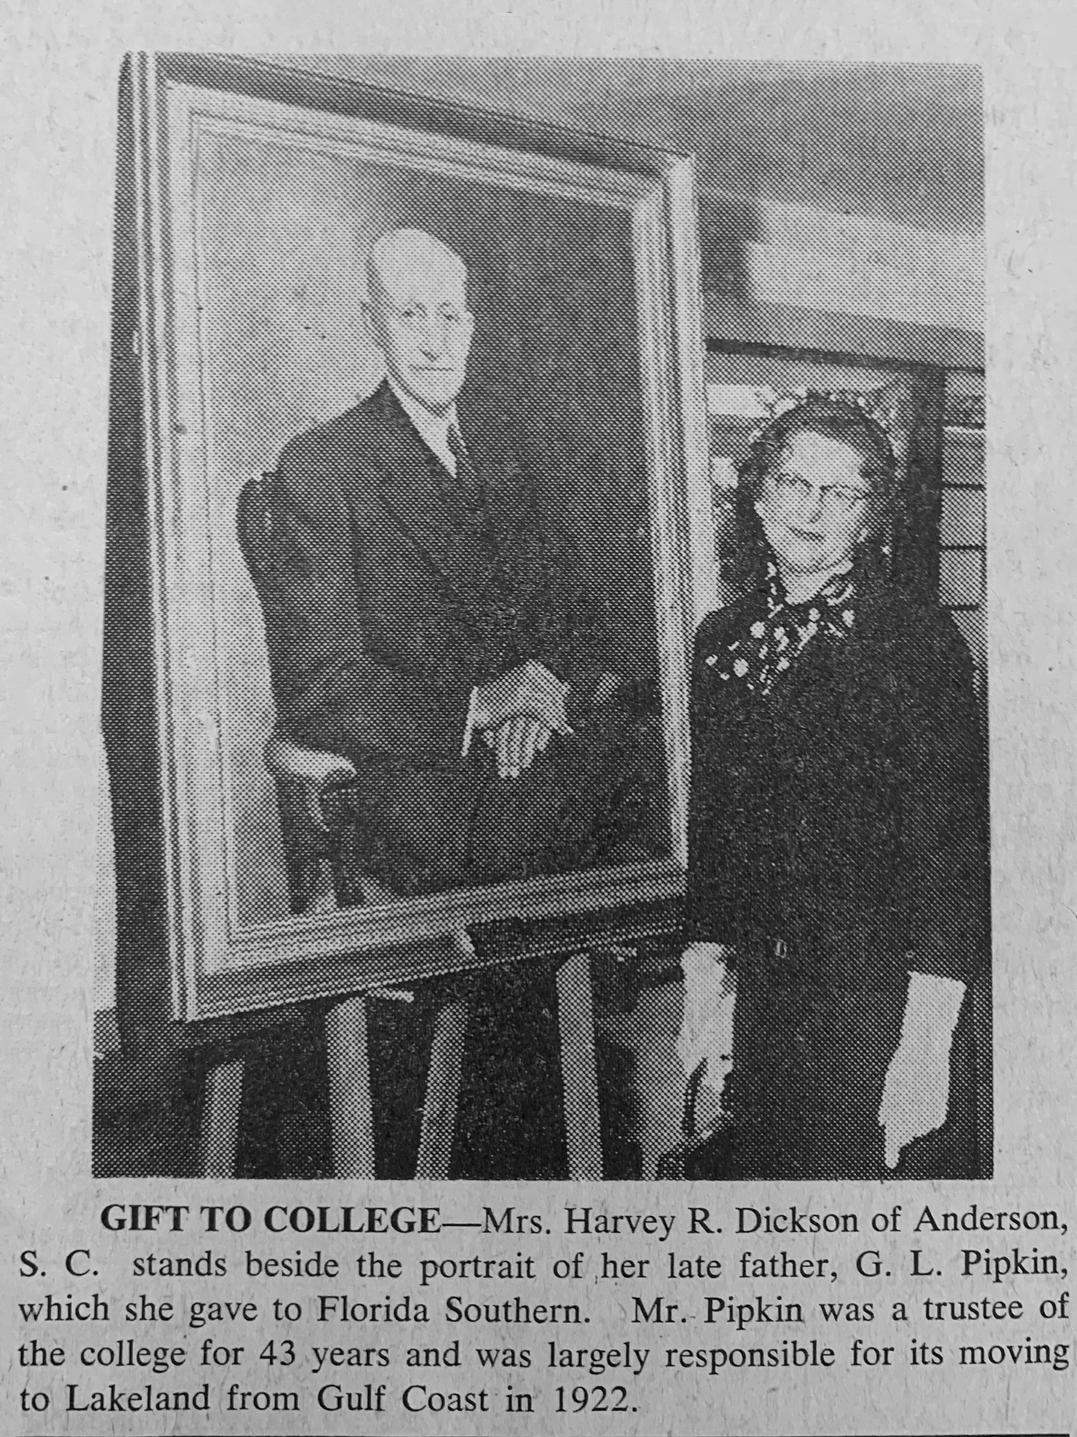 GIFT TO COLLEGE - Mrs. Harvey R. Dickson of Anderson, S. C. stands beside the portrait of her late father, G. L. Pipkin [sic], which she gave to Florida Southern. Mr. Pipkin was a trustee of the college for 43 years and was largely responsible for its moving to Lakeland from Gulf Coast in 1922.